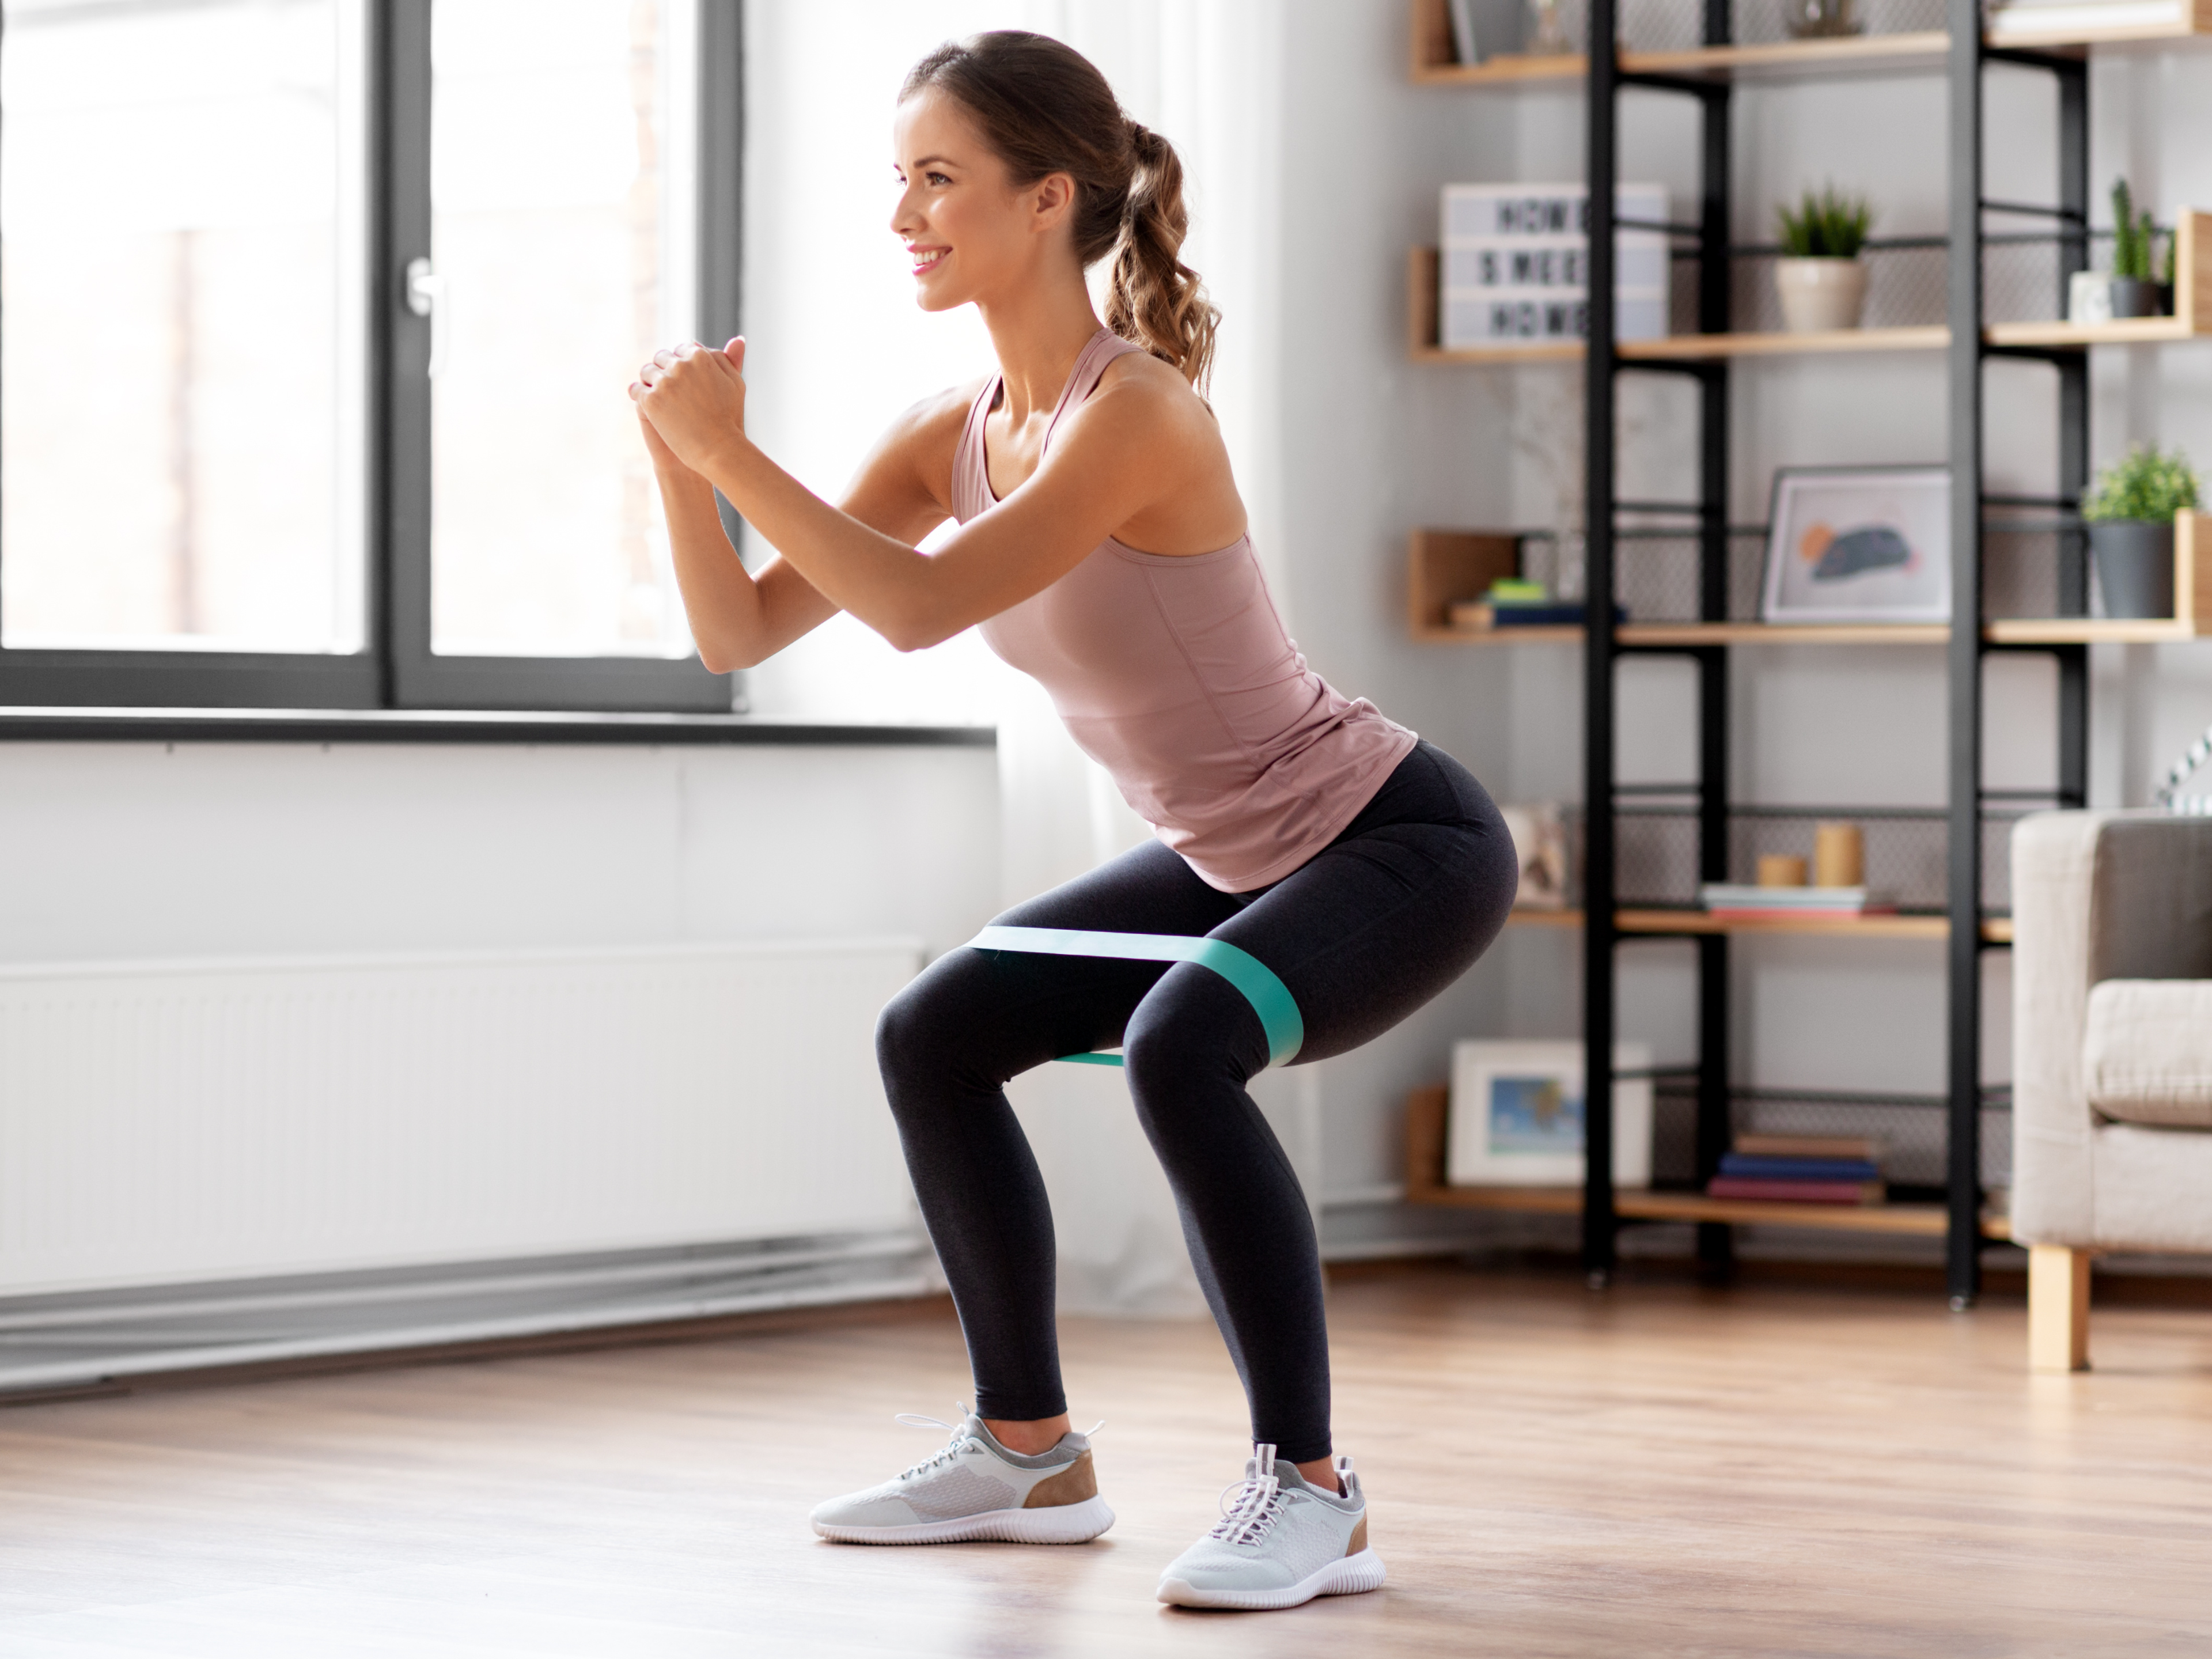 Strength and control exercises can help treat patellofemoral pain syndrome.